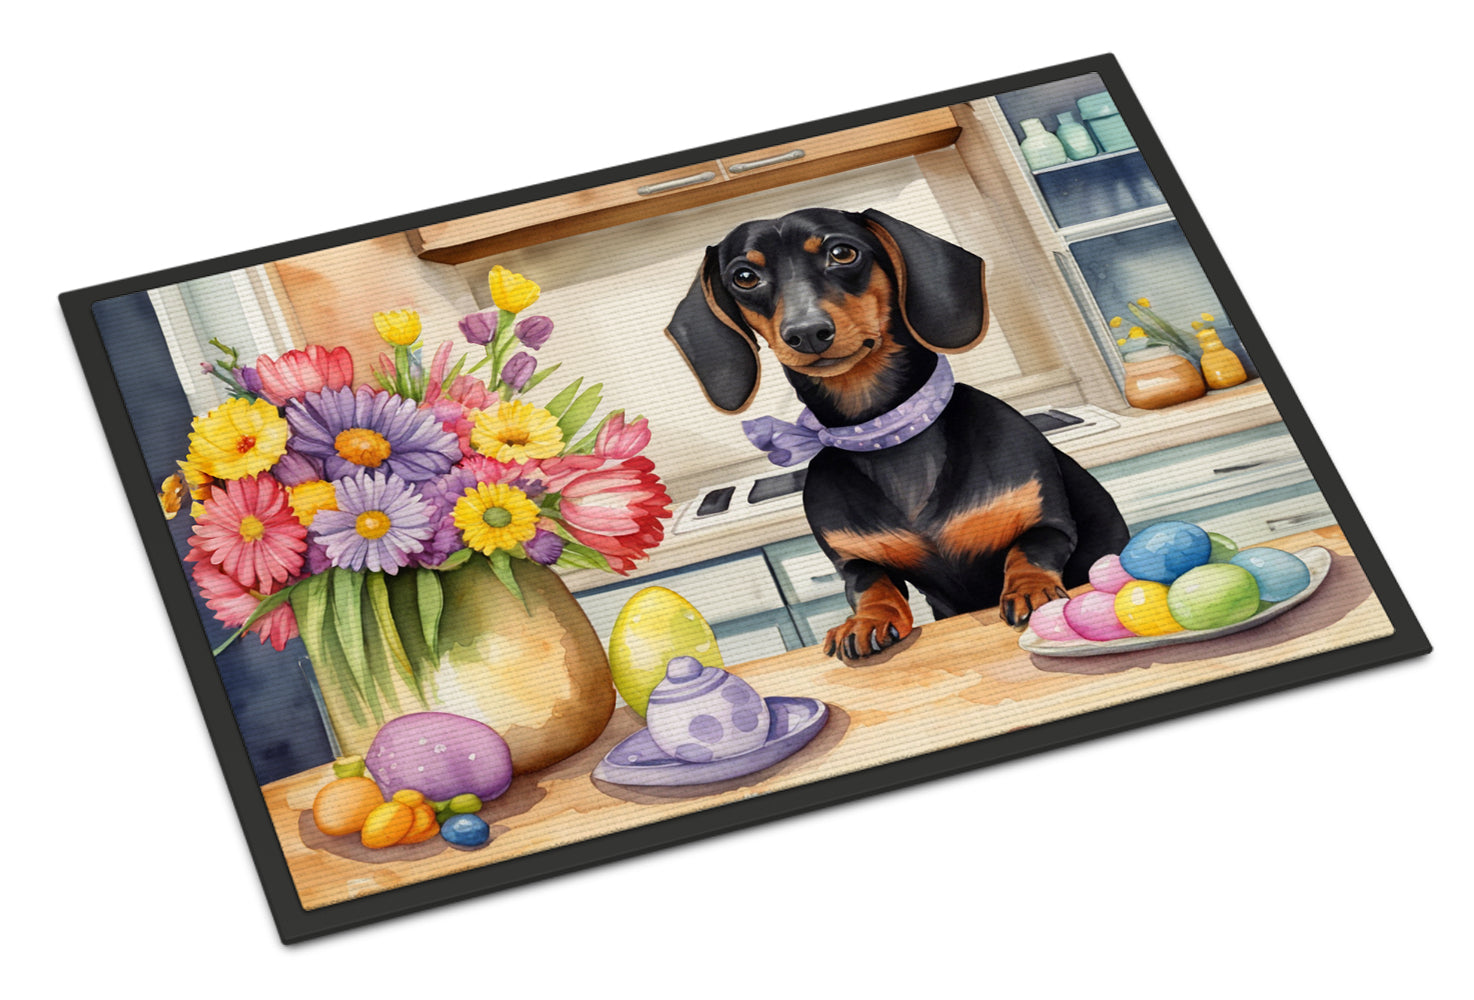 Buy this Decorating Easter Dachshund Doormat